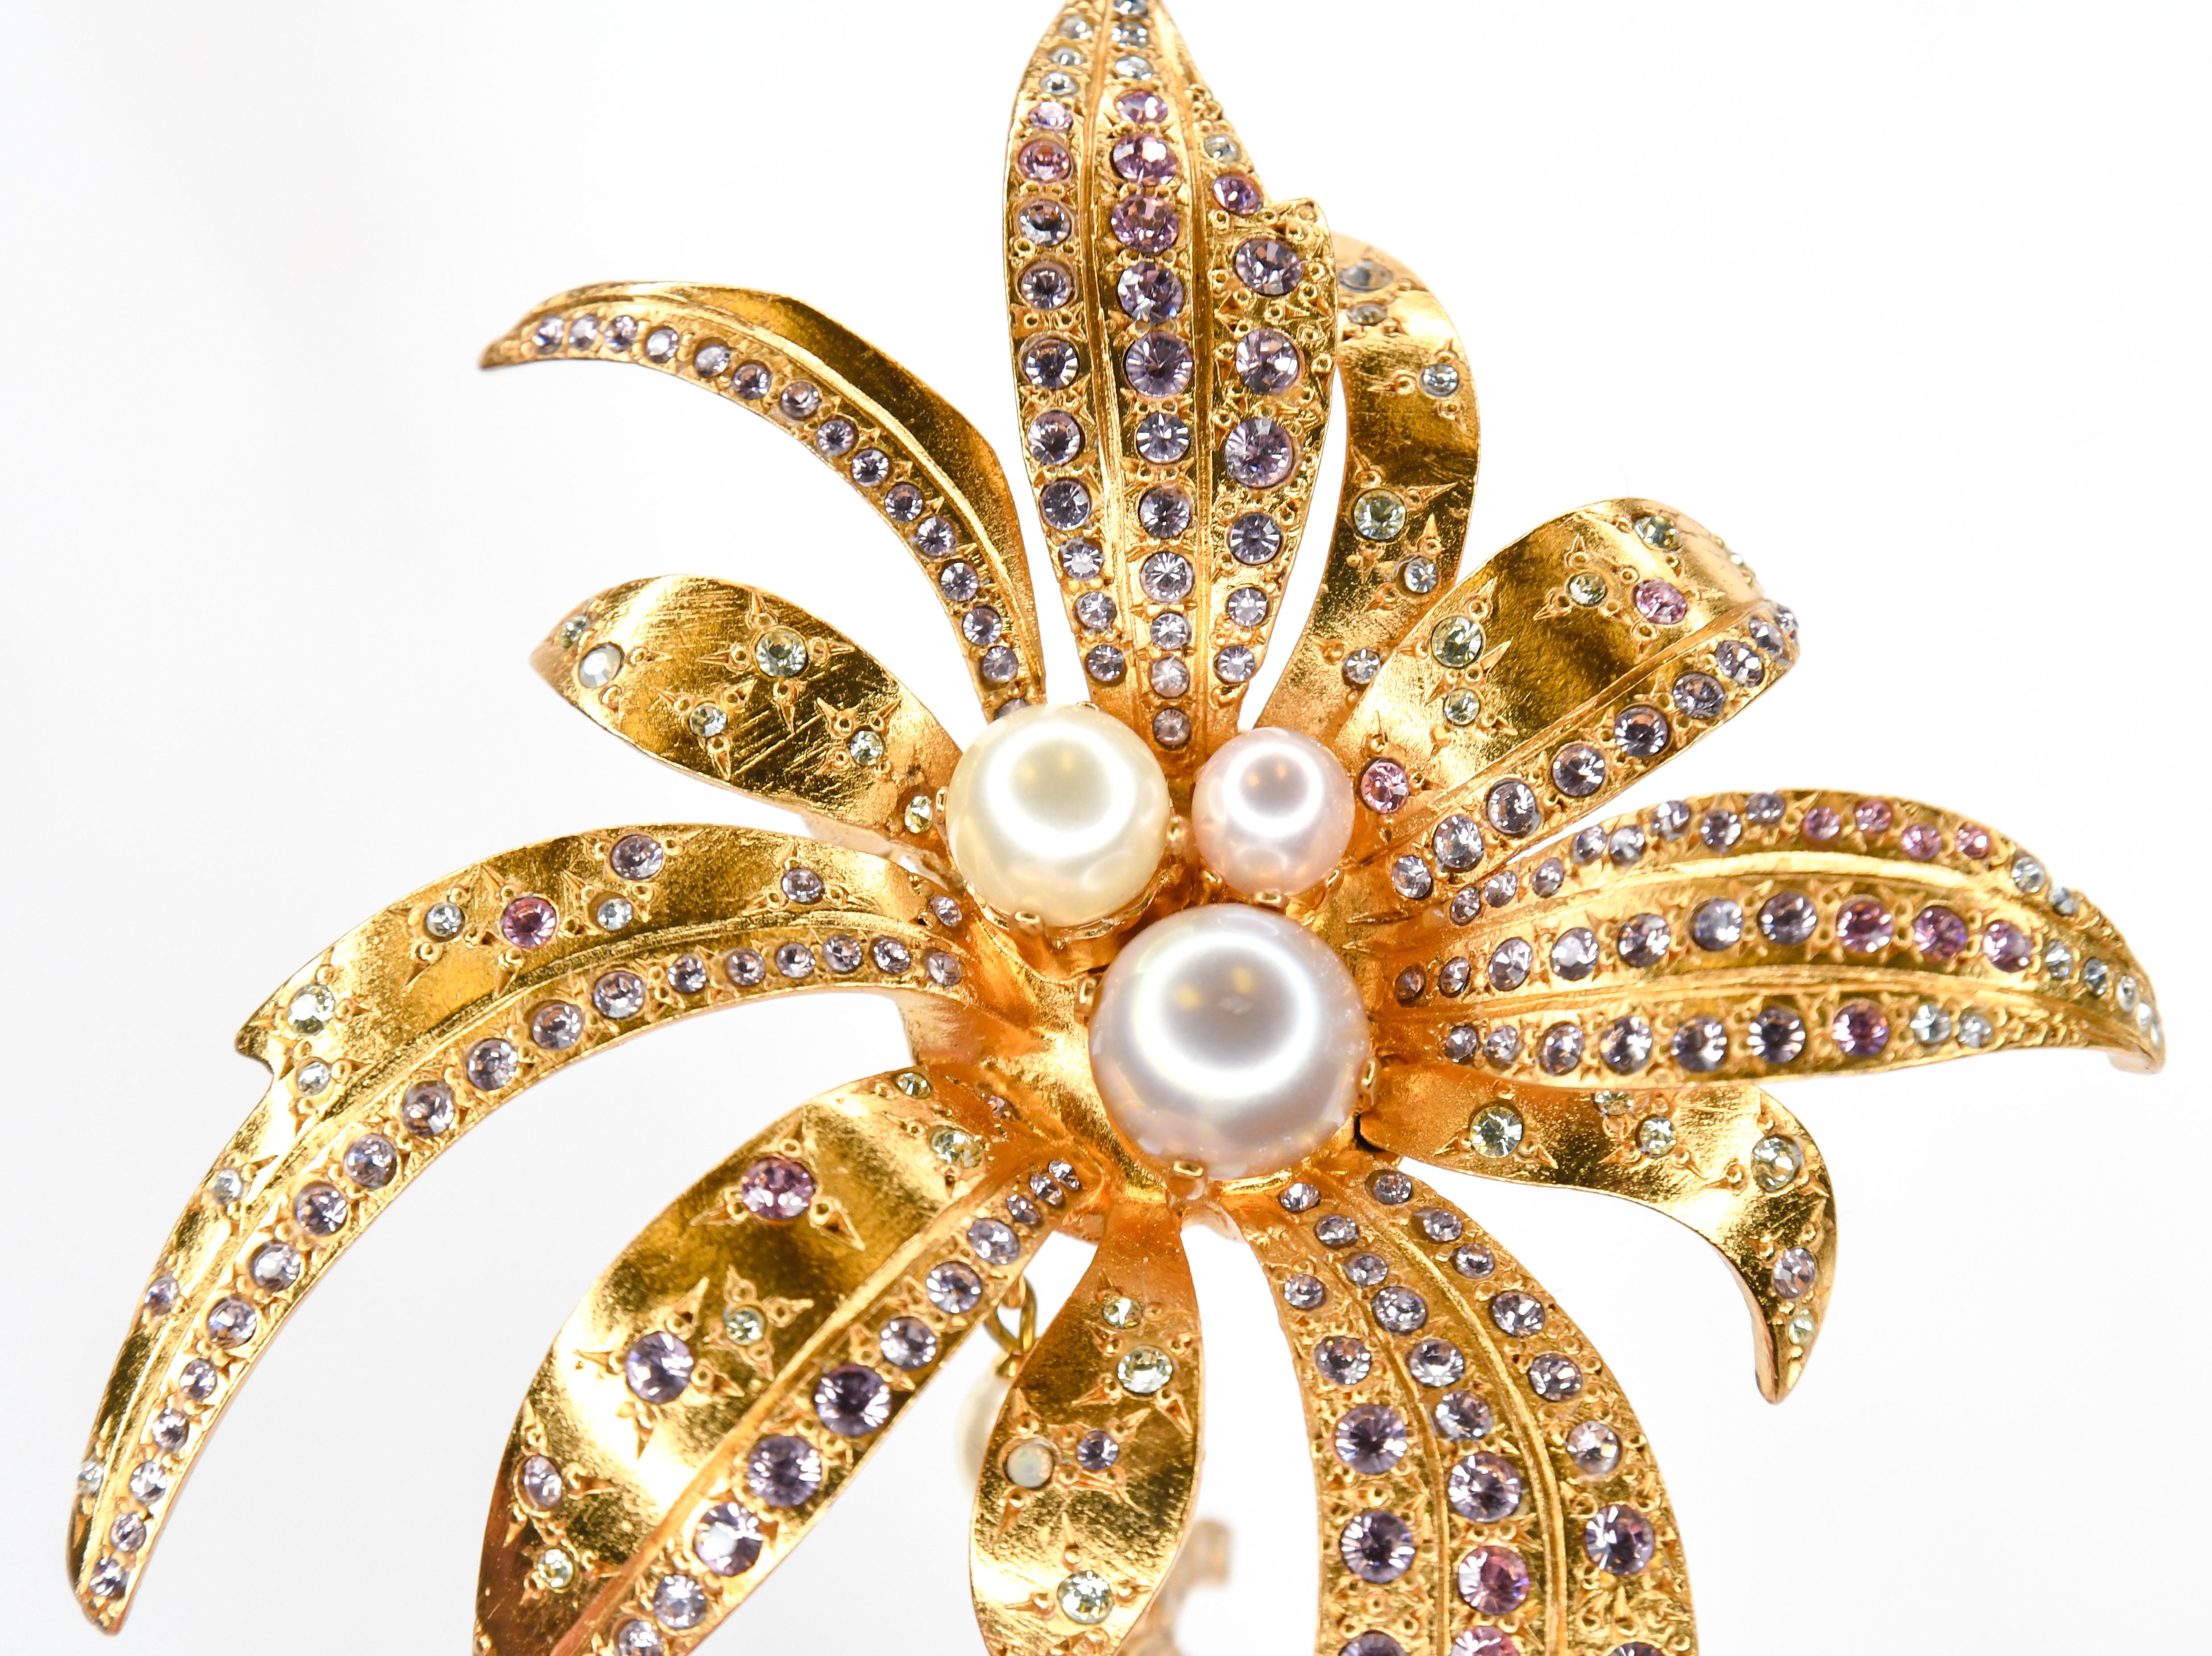 Chanel.  Sometimes that's all you need to know!  This amazing Chanel brooch in matte finish gold tone replicates a stylized flower with pearls at the center and leaves sprinkled with clear and pink gripoix stones.  A pearl topped CC logo with Aurora